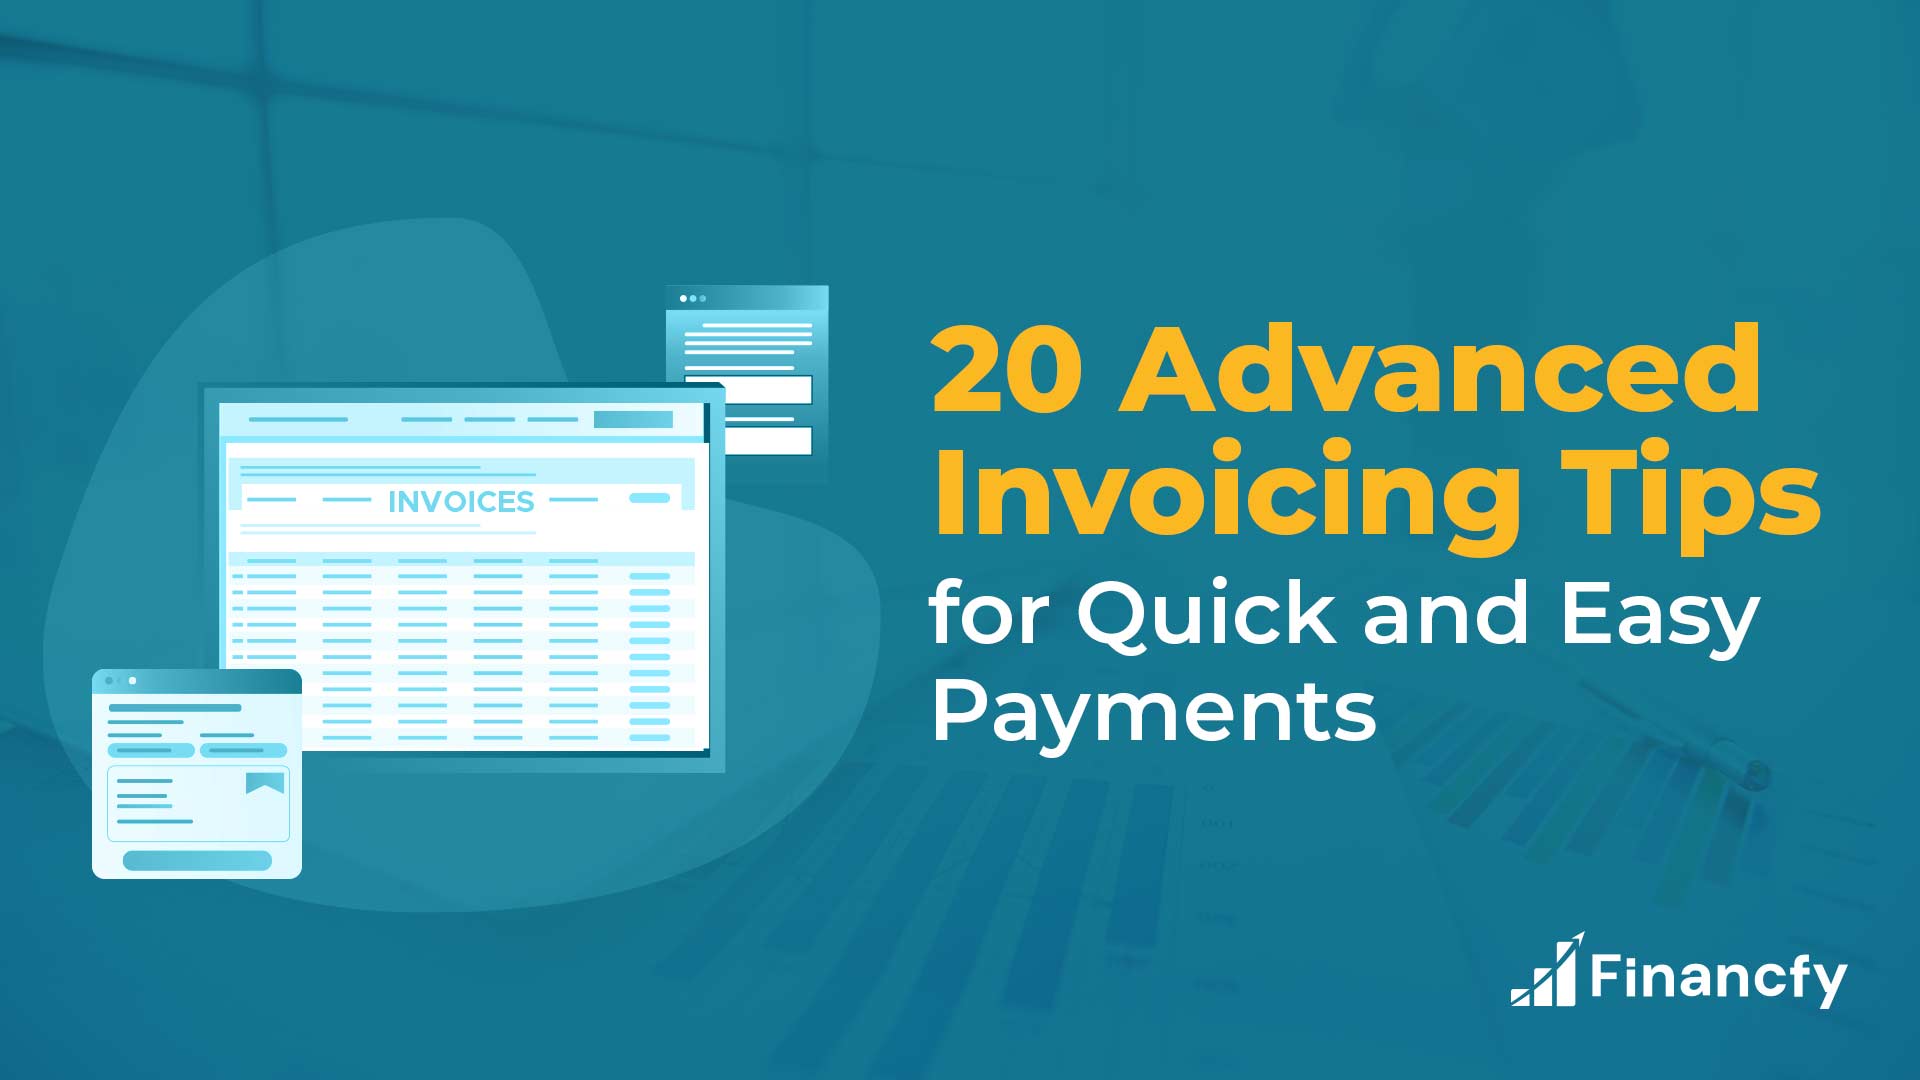 20 Advanced Invoicing Tips for Quick and Easy Payments